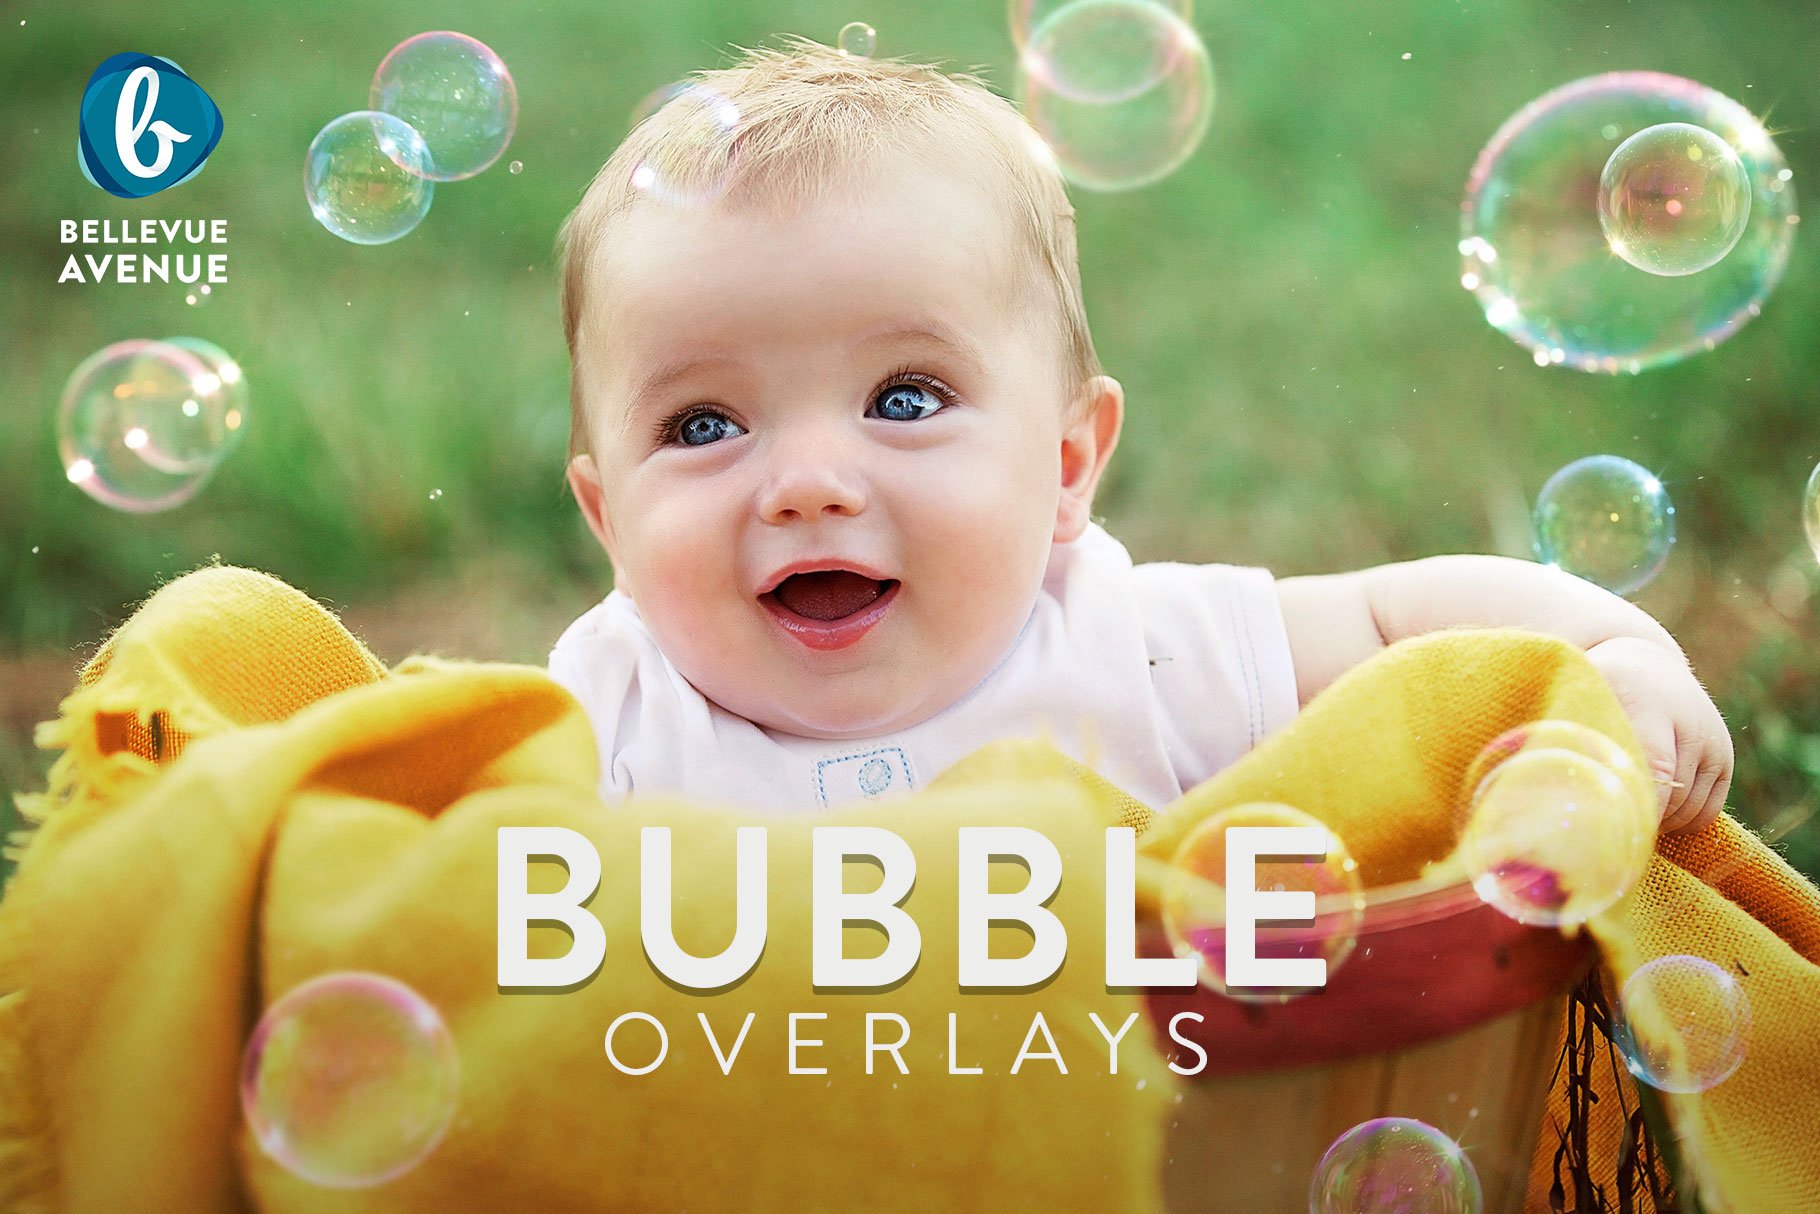 Bubble Overlays (Real)cover image.